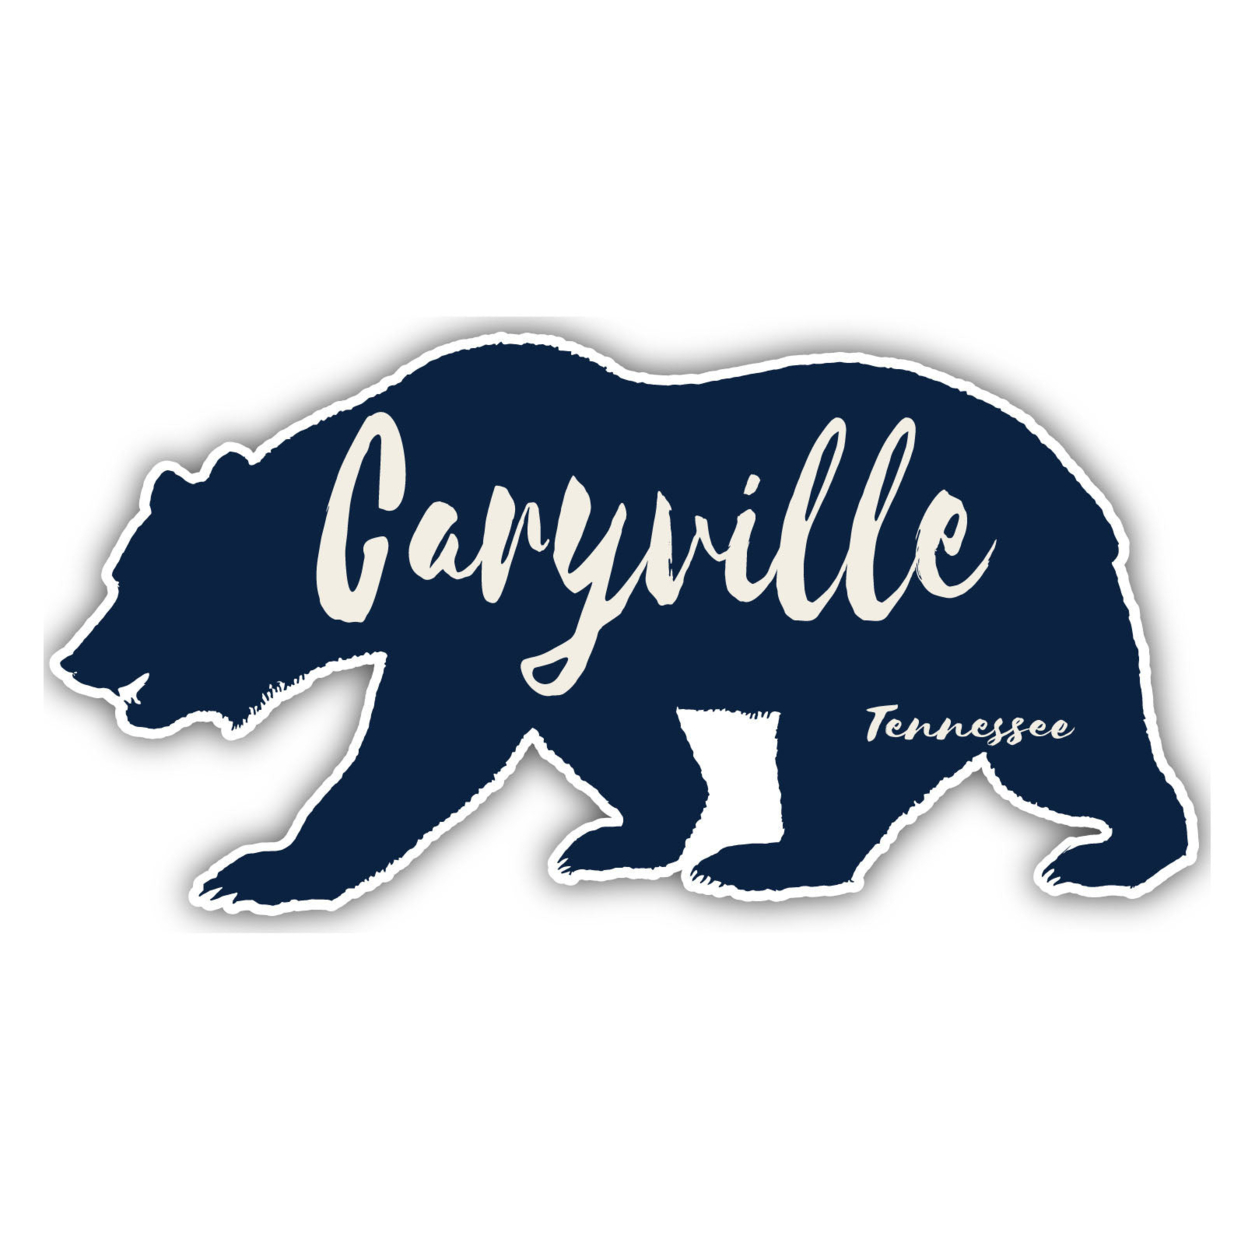 Caryville Tennessee Souvenir Decorative Stickers (Choose Theme And Size) - 4-Pack, 6-Inch, Bear